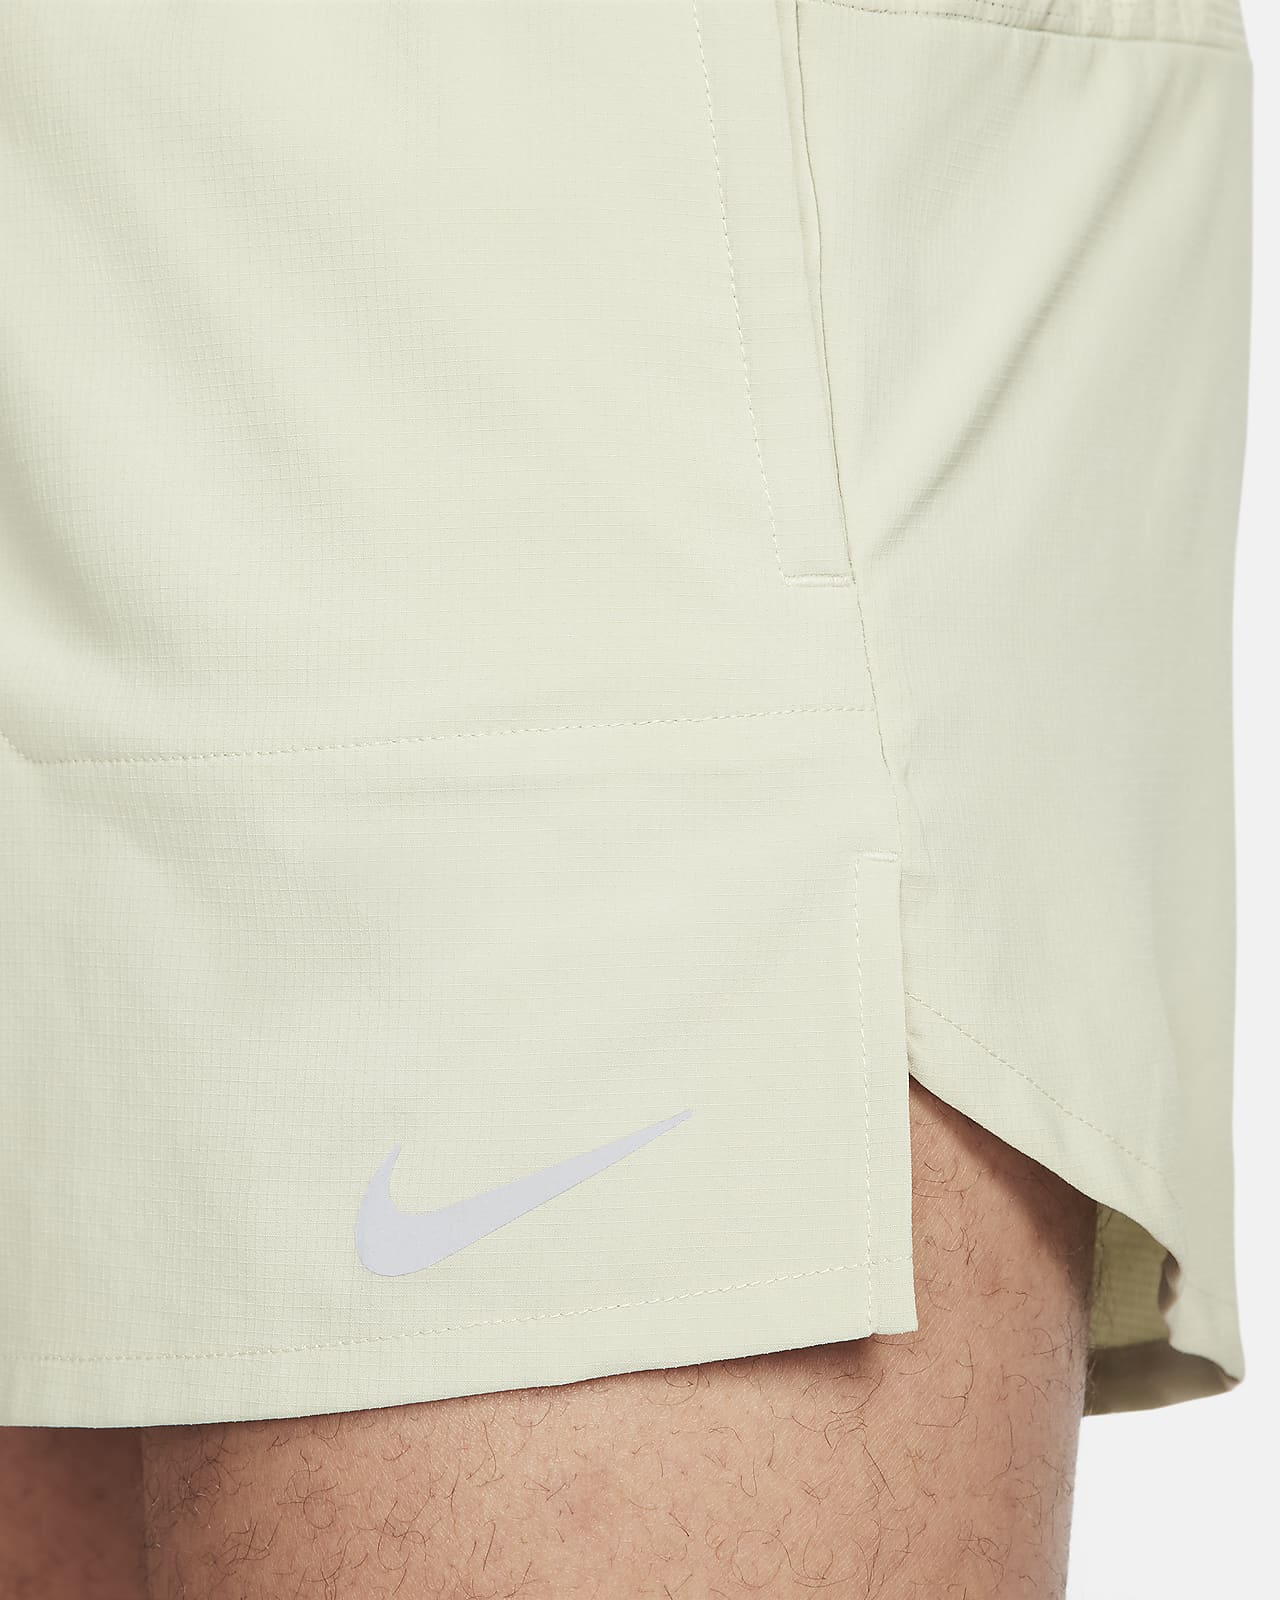 Nike Stride Men's Dri-FIT 5 Brief-Lined Running Shorts.